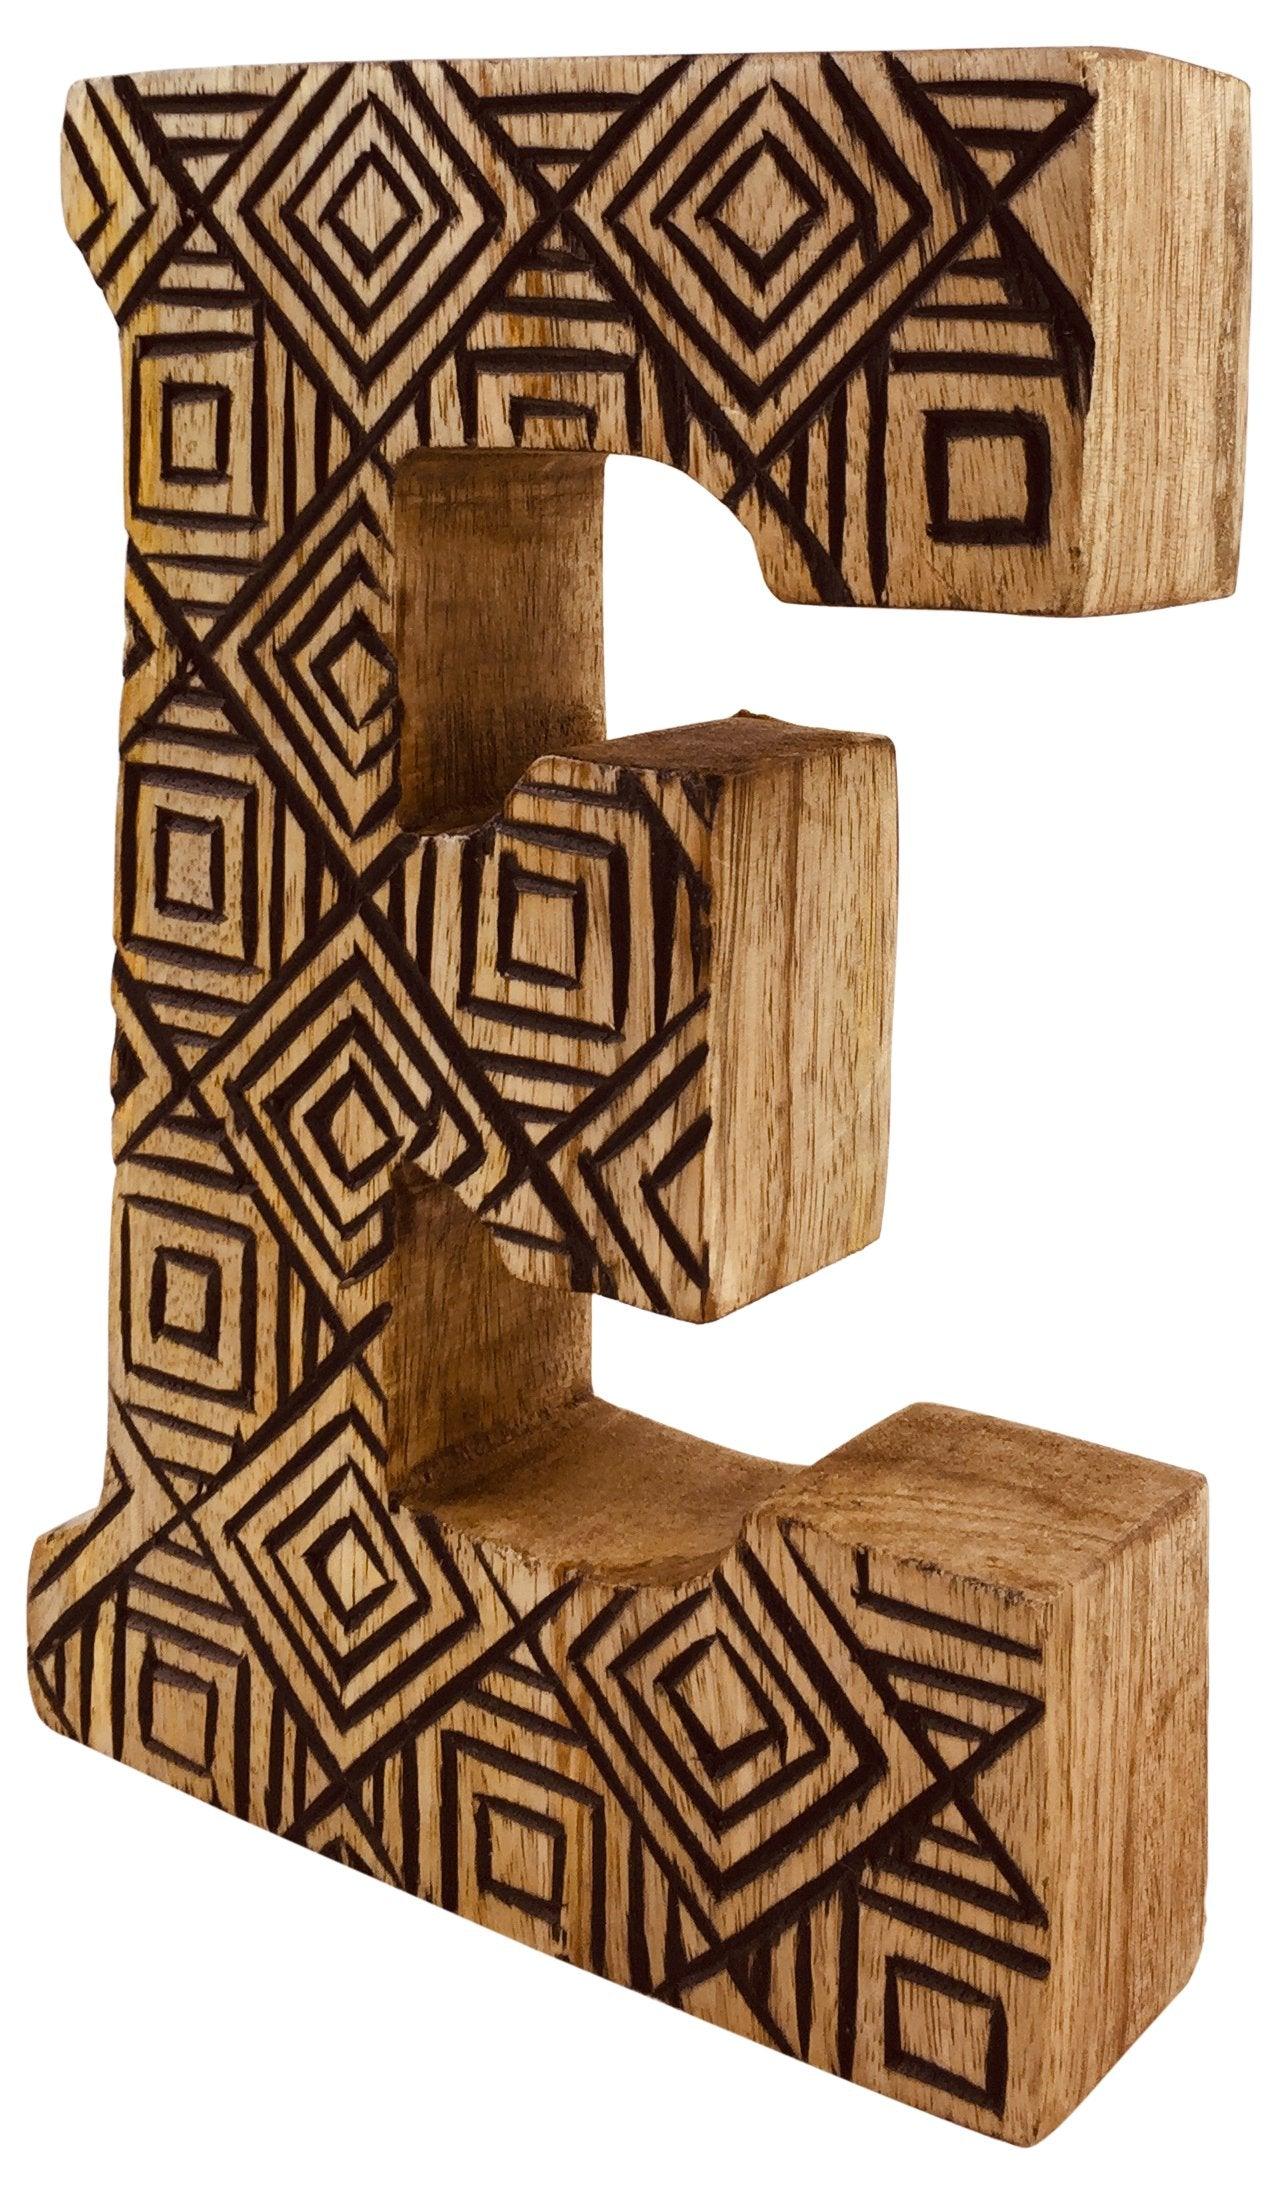 View Hand Carved Wooden Geometric Letter E information